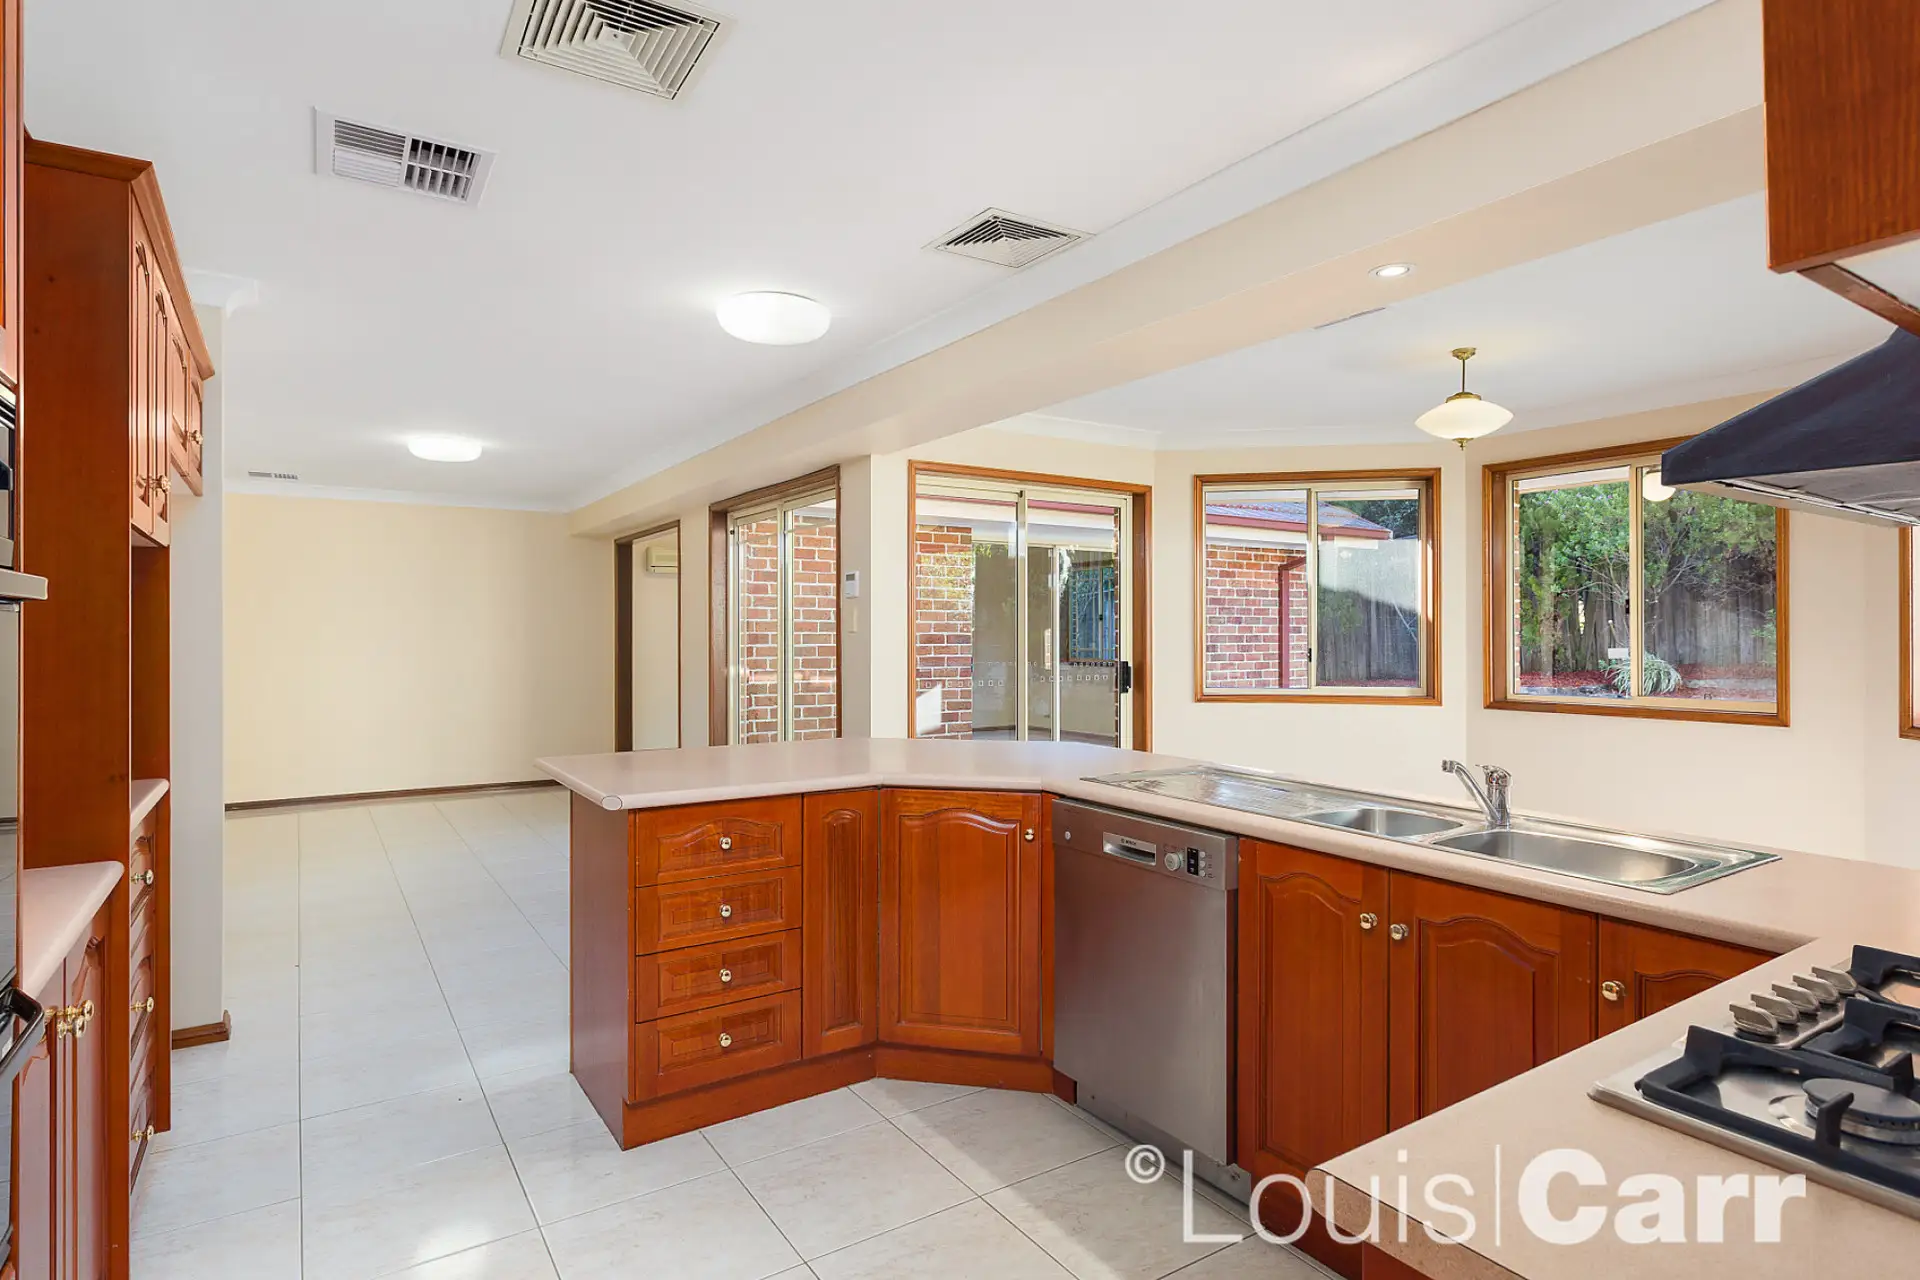 Photo #2: 9 Parkwood Close, Castle Hill - Sold by Louis Carr Real Estate